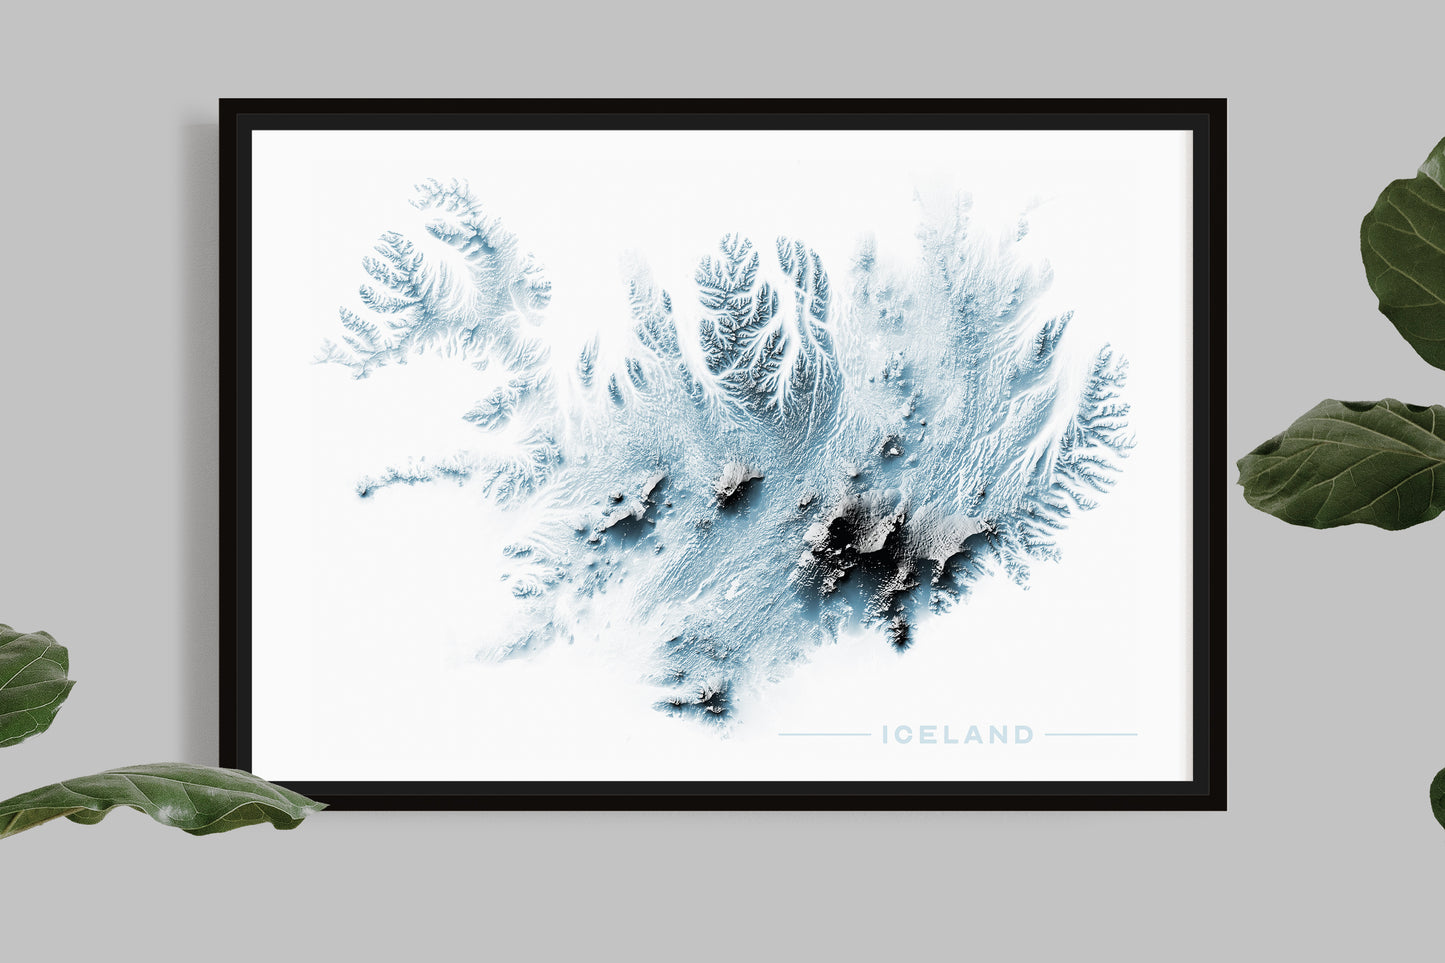 Iceland - 3D Relief Effect Map